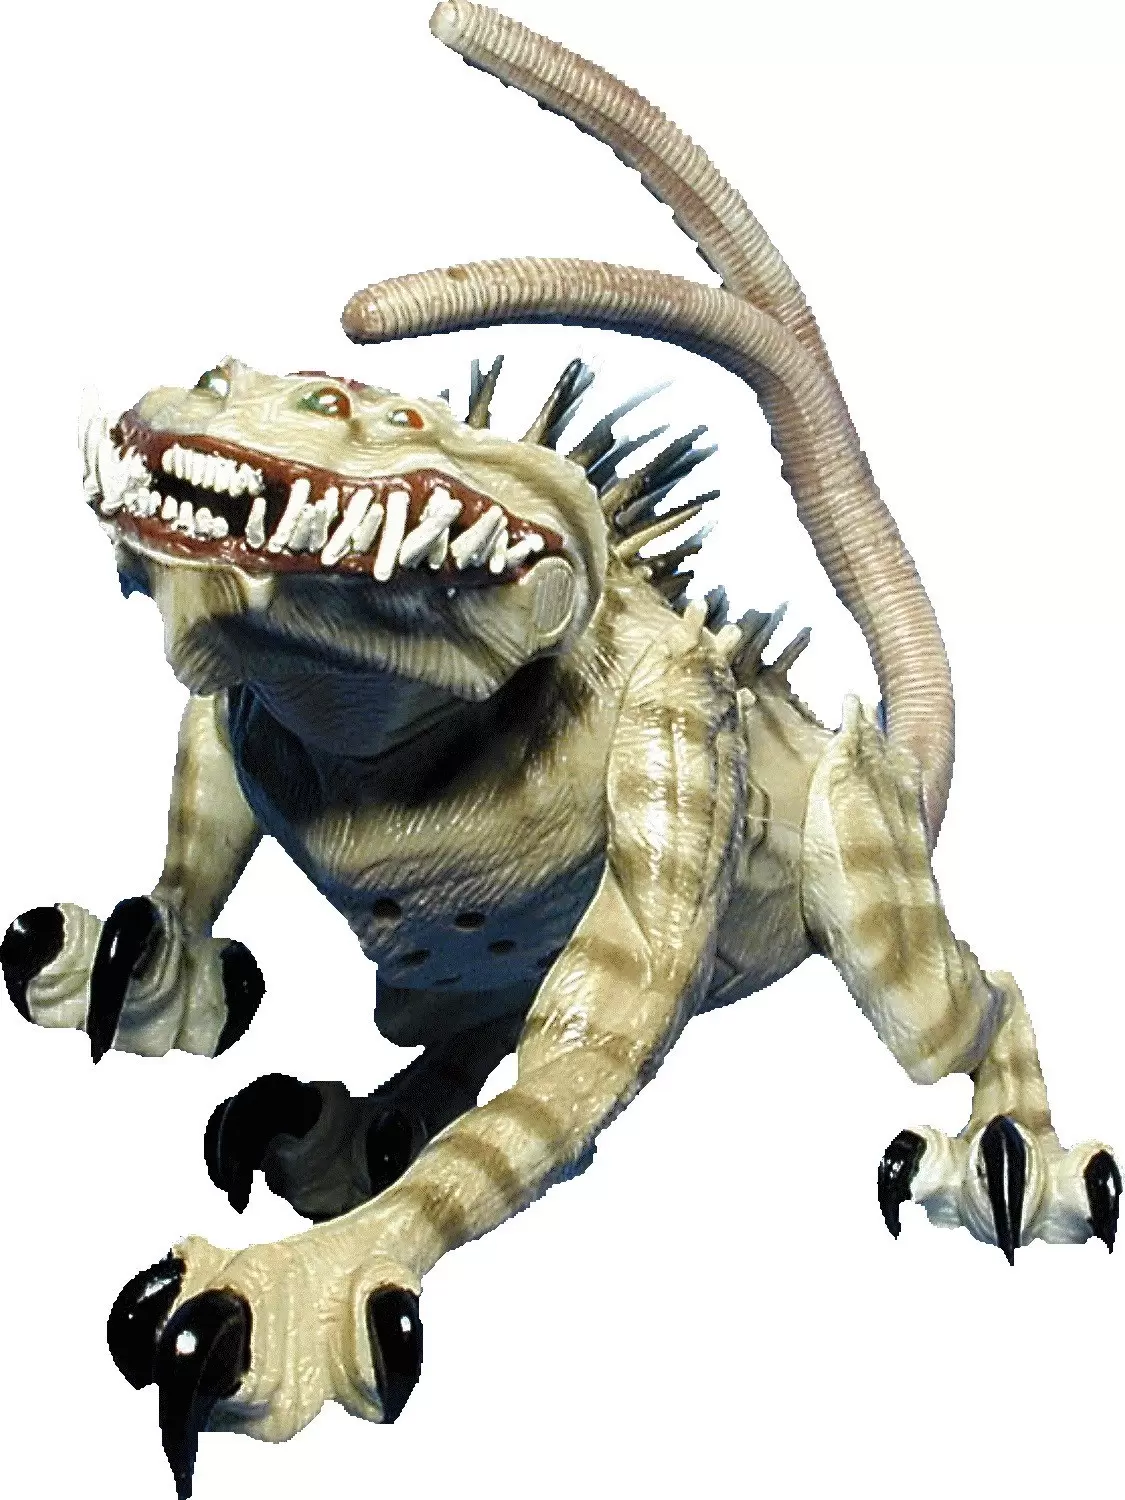 Star Wars SAGA - Nexu with Snapping Jaw and Attack Roar